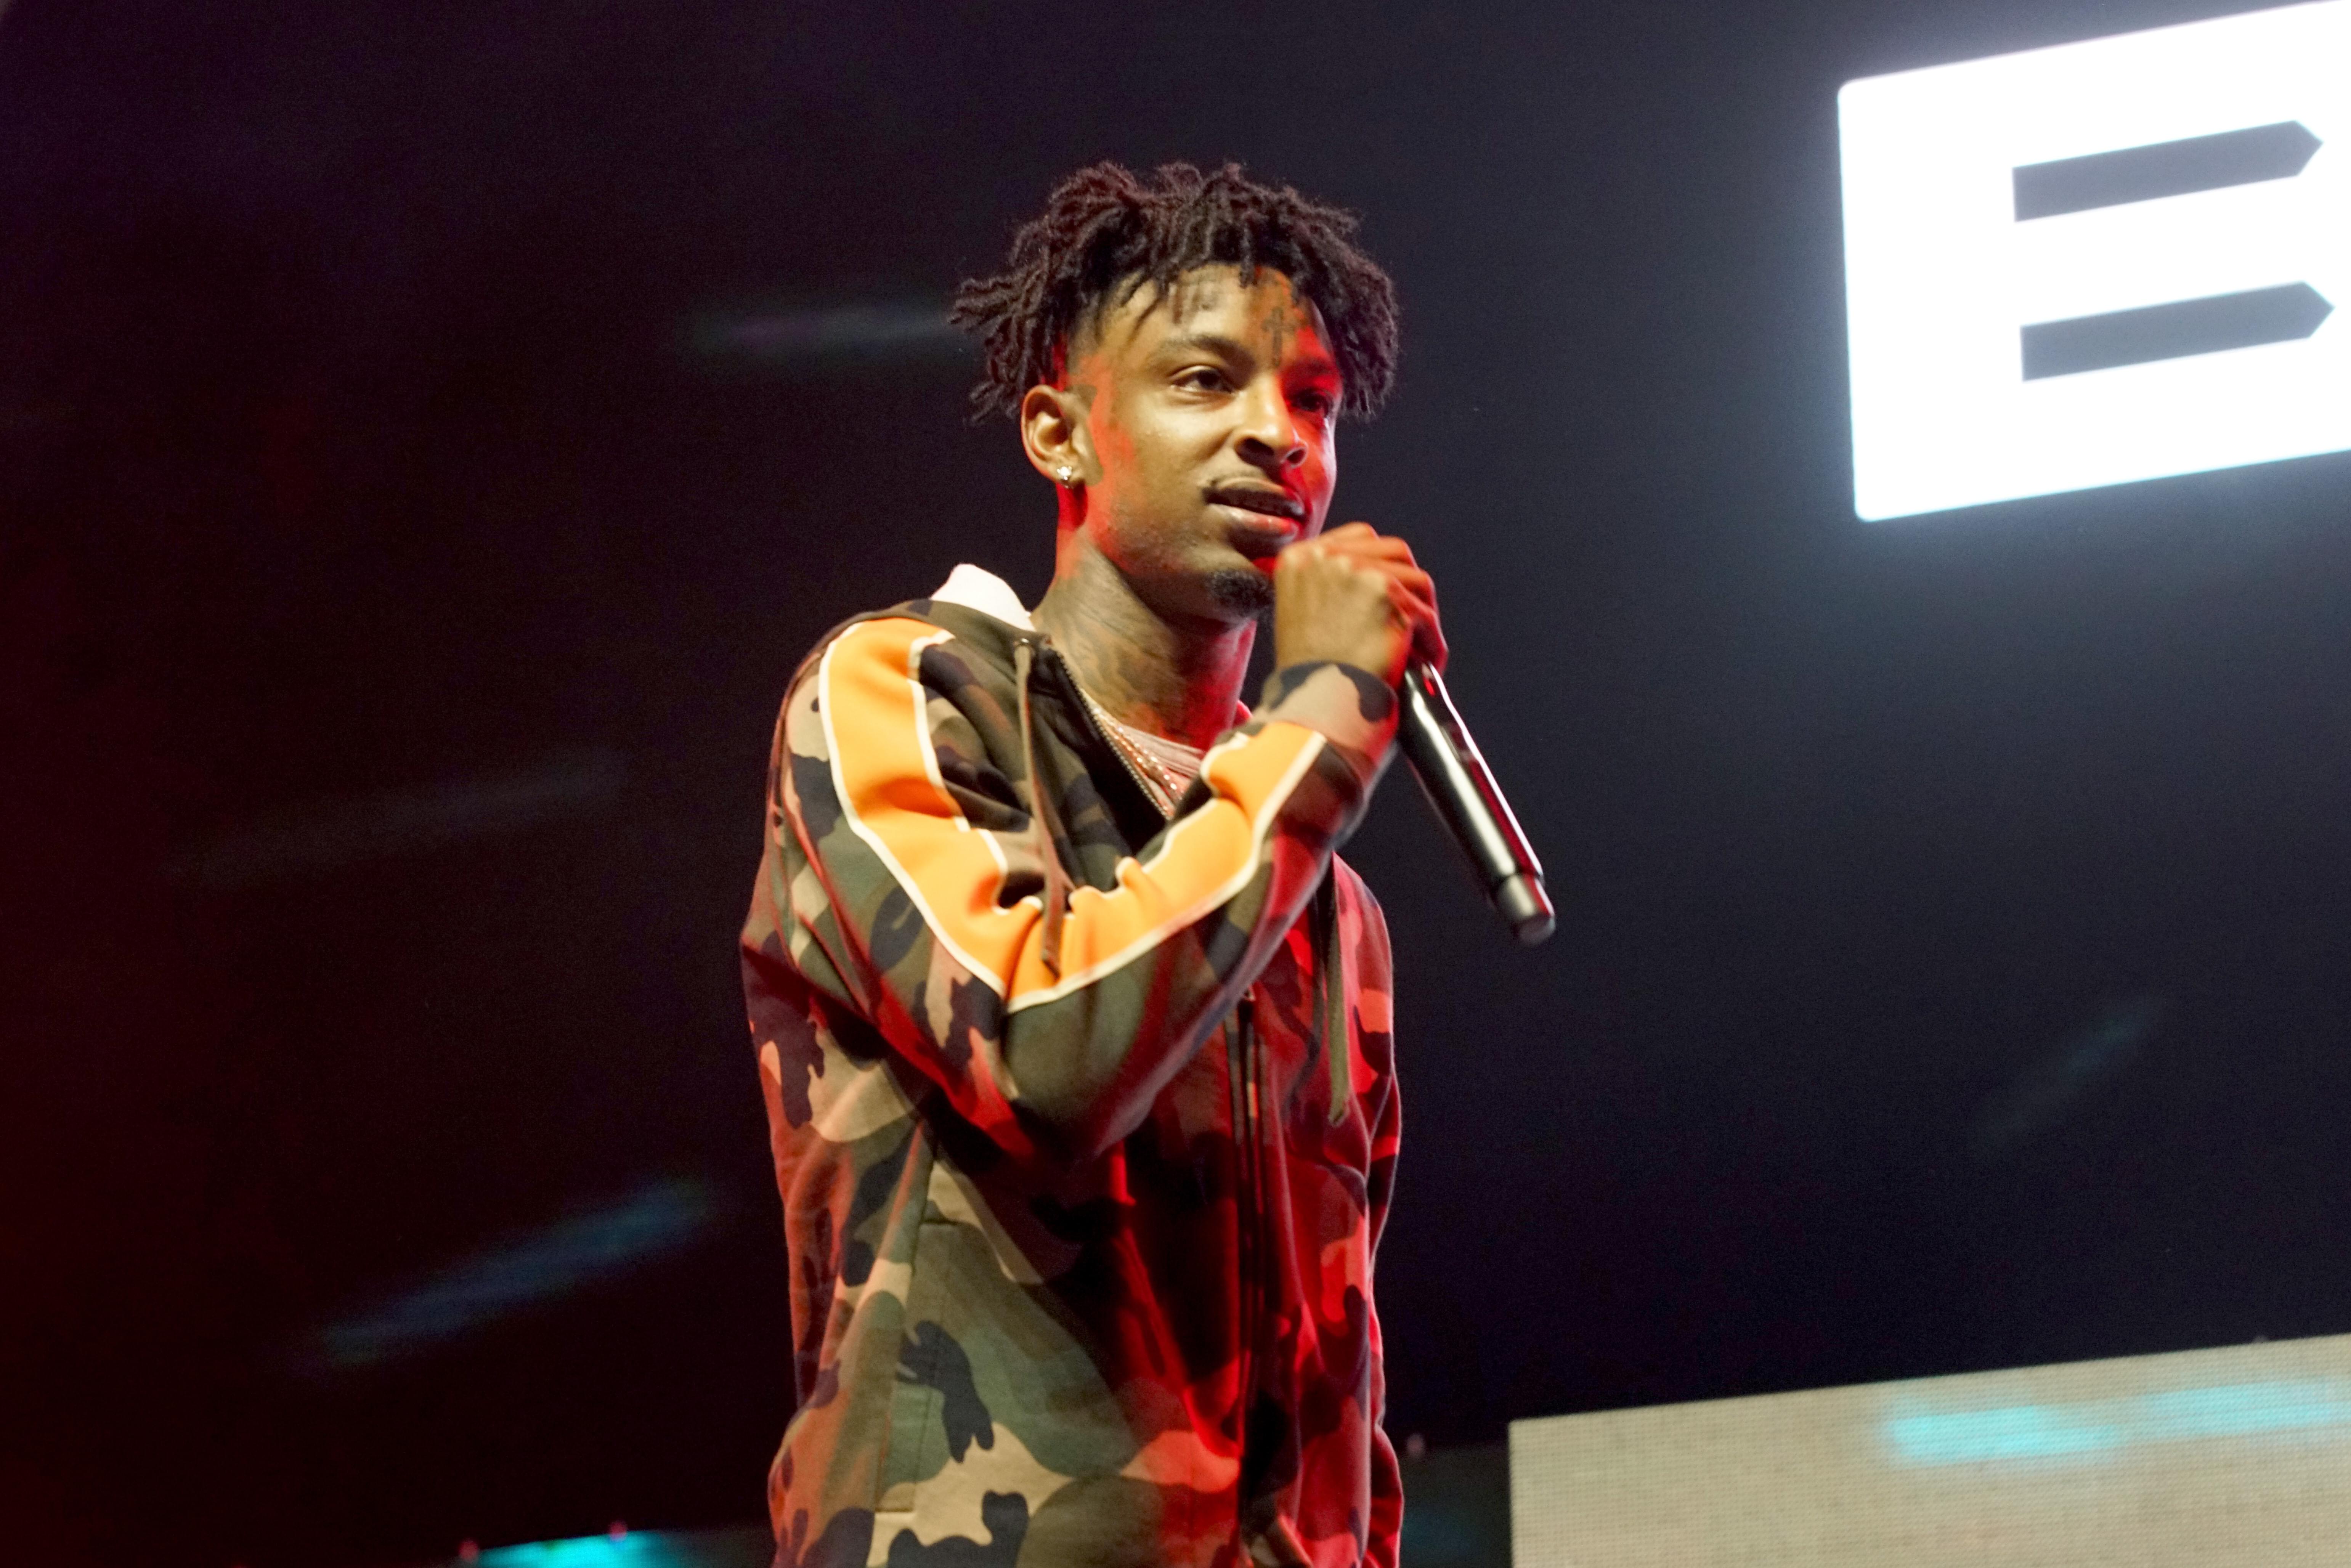 21 Savage Flies A Plane For The First Time [WATCH]